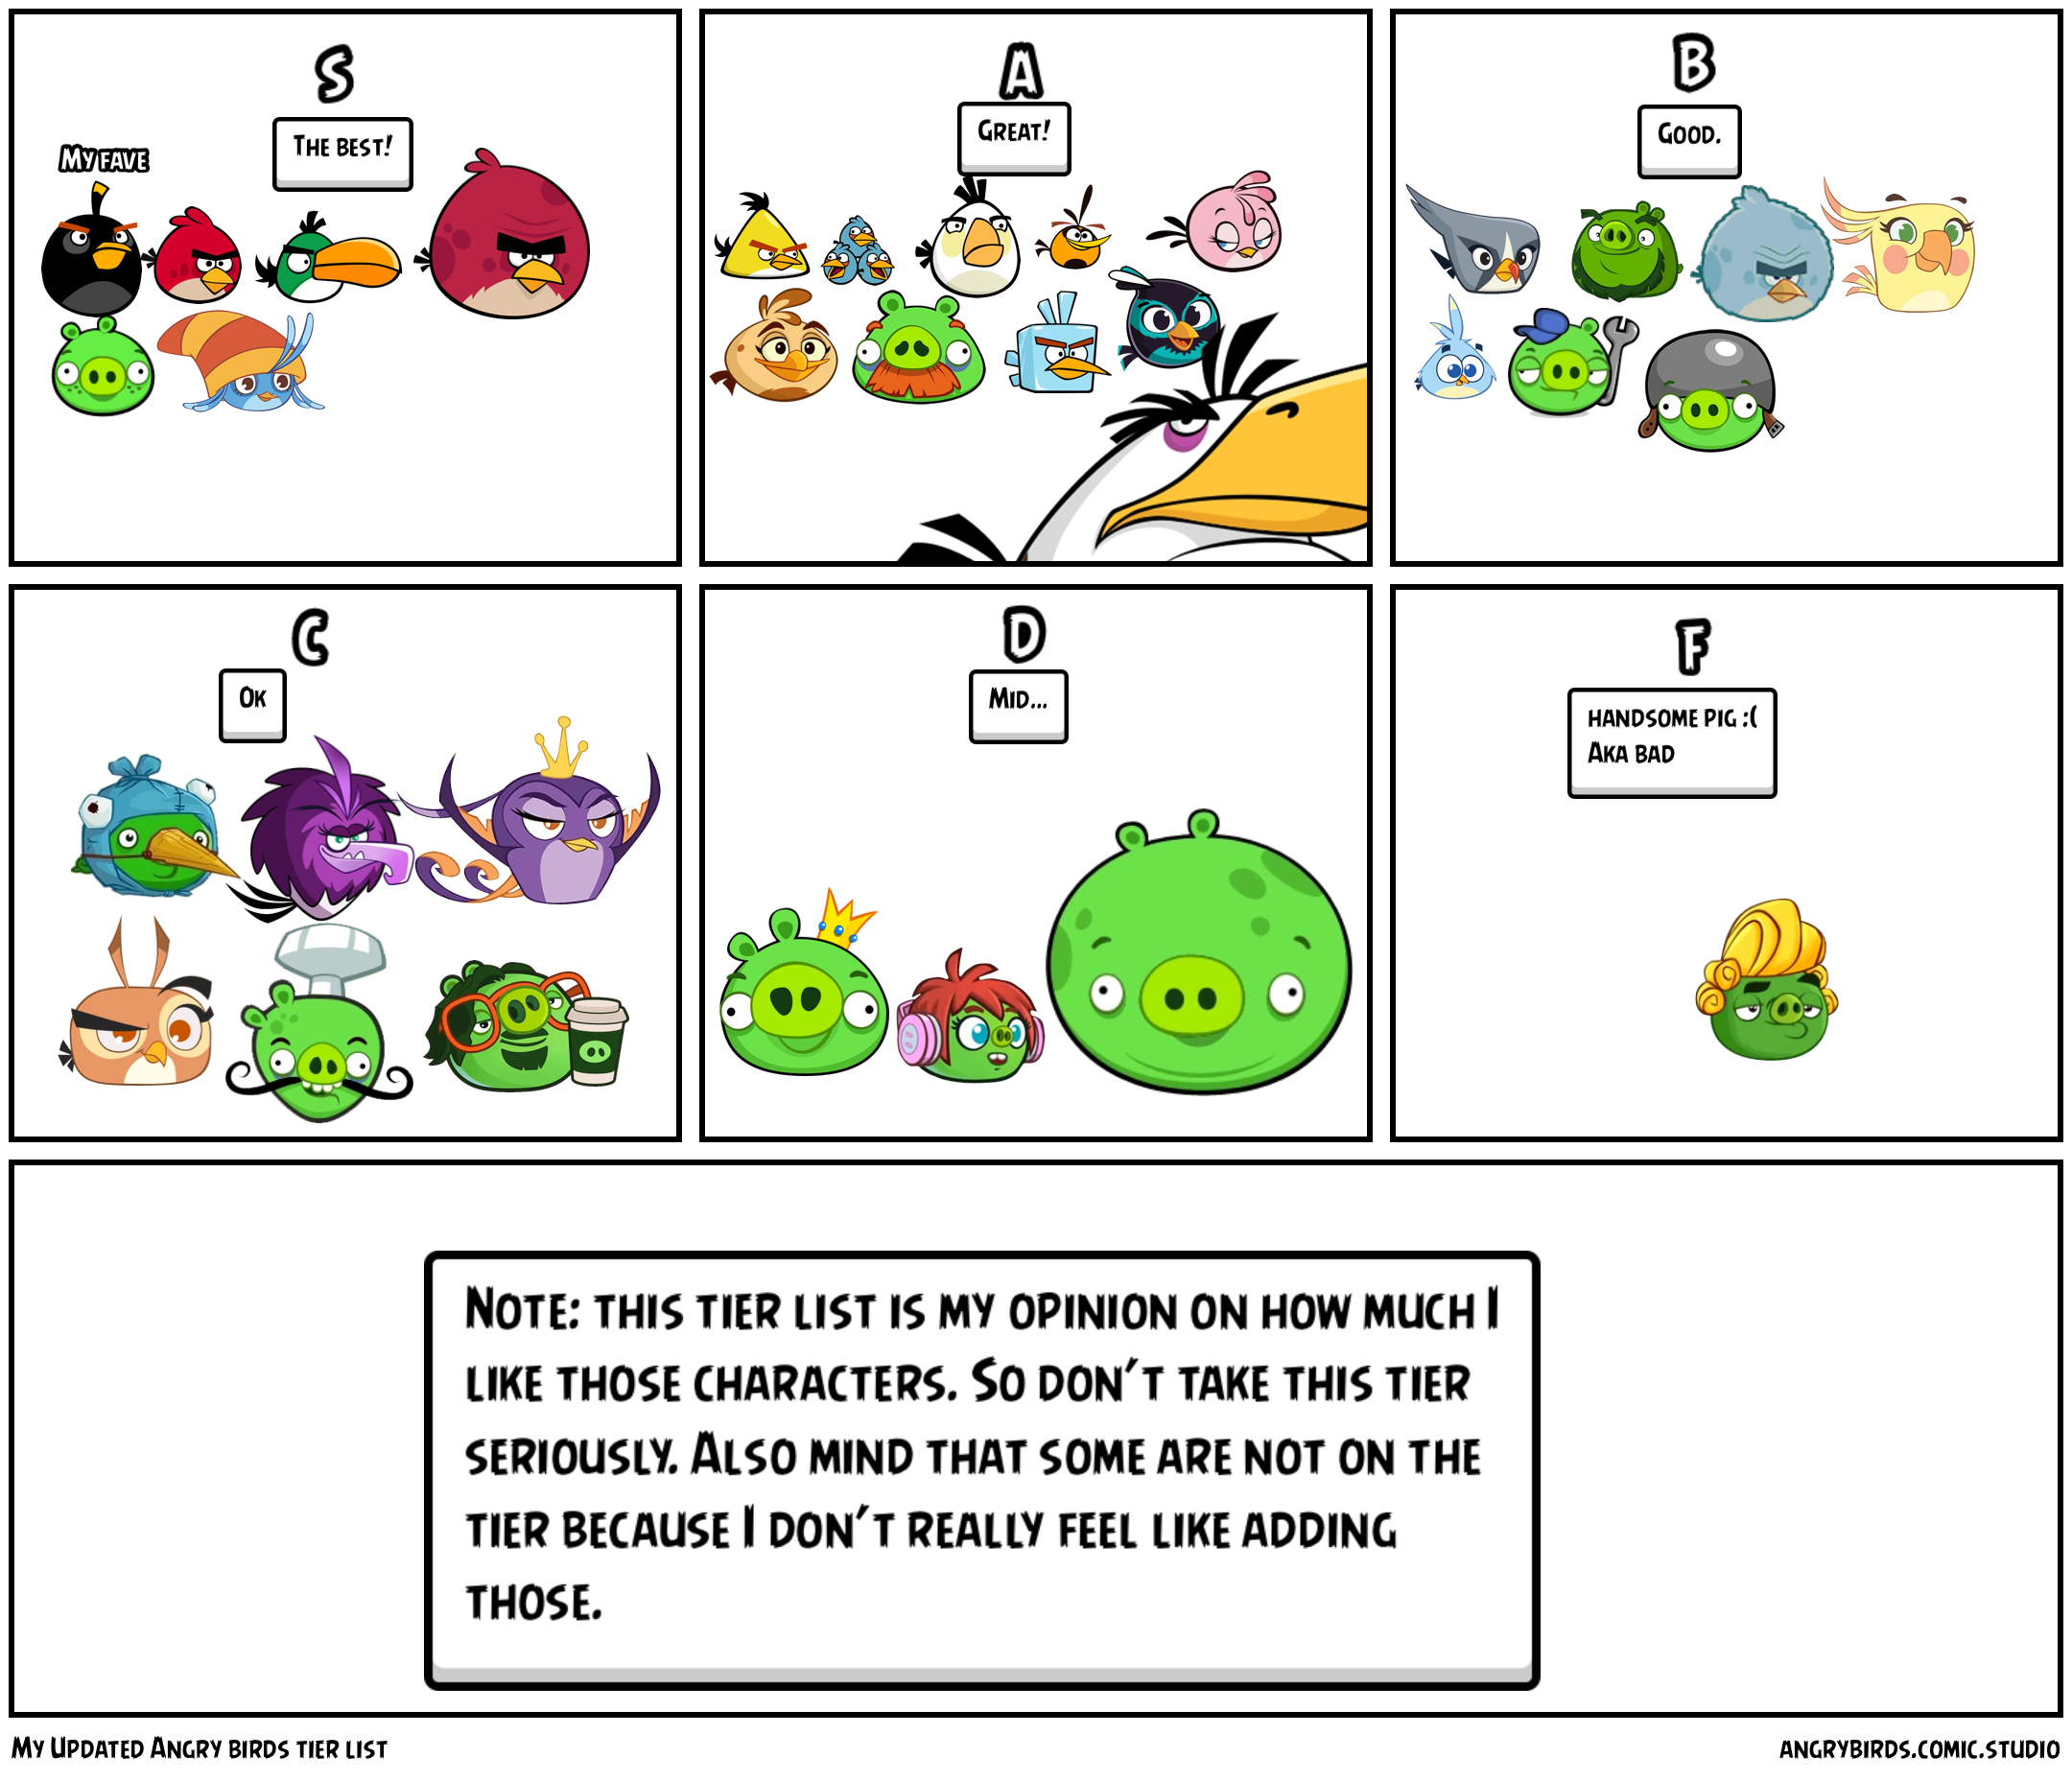 My Updated Angry birds tier list